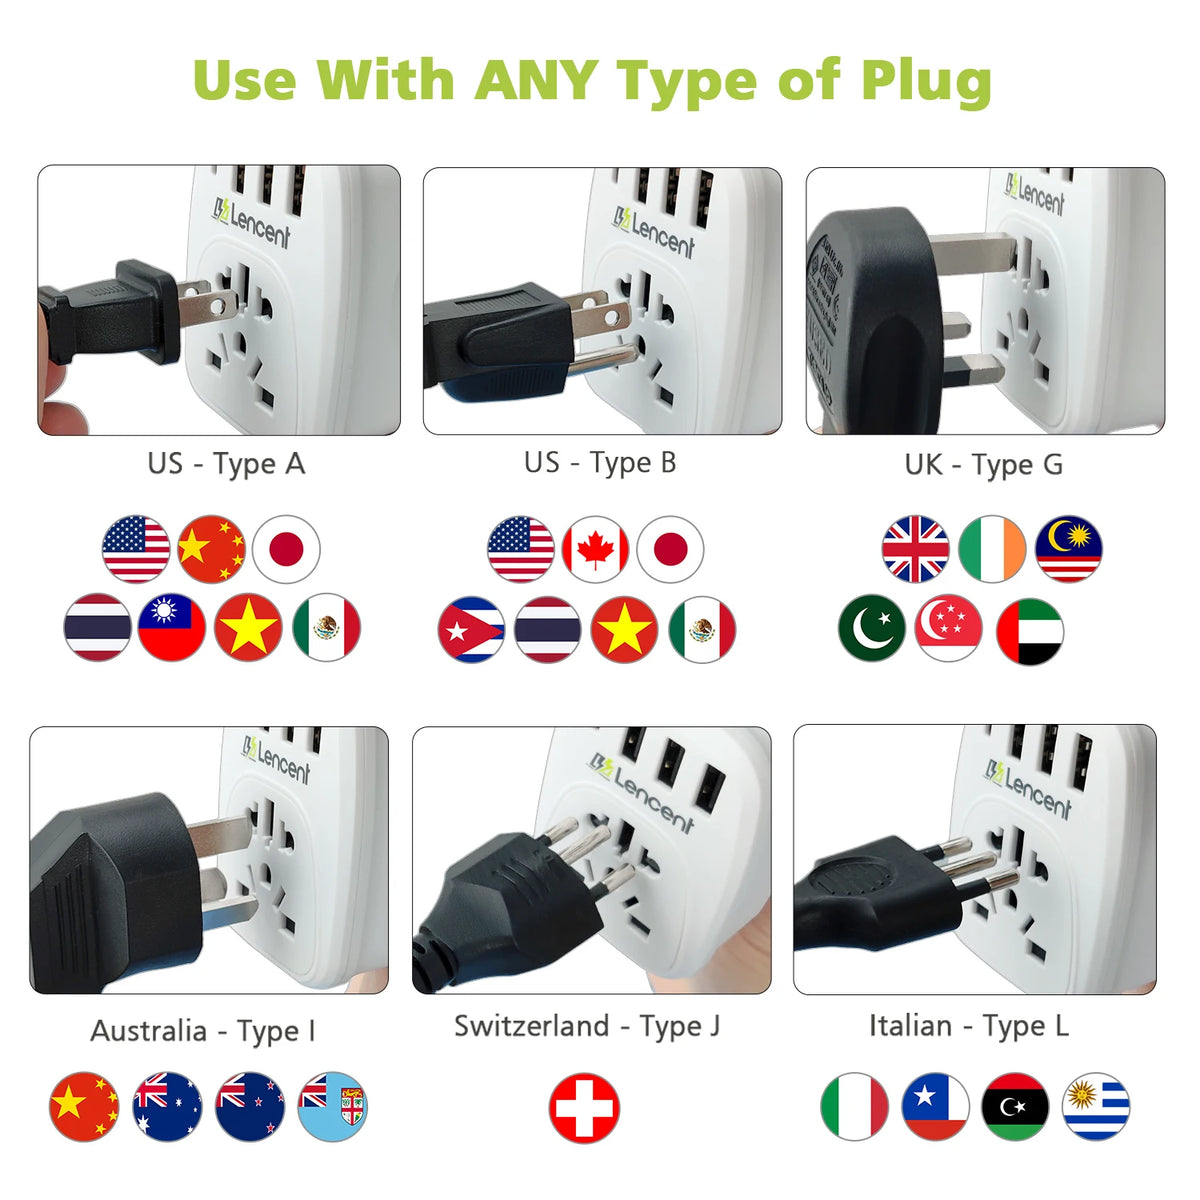 Lencent 5-in-1 EU To Universal Plug Adapter With 1 USB-C Port And 3 USB Ports | Power Plug Converter (White) - Travelupic